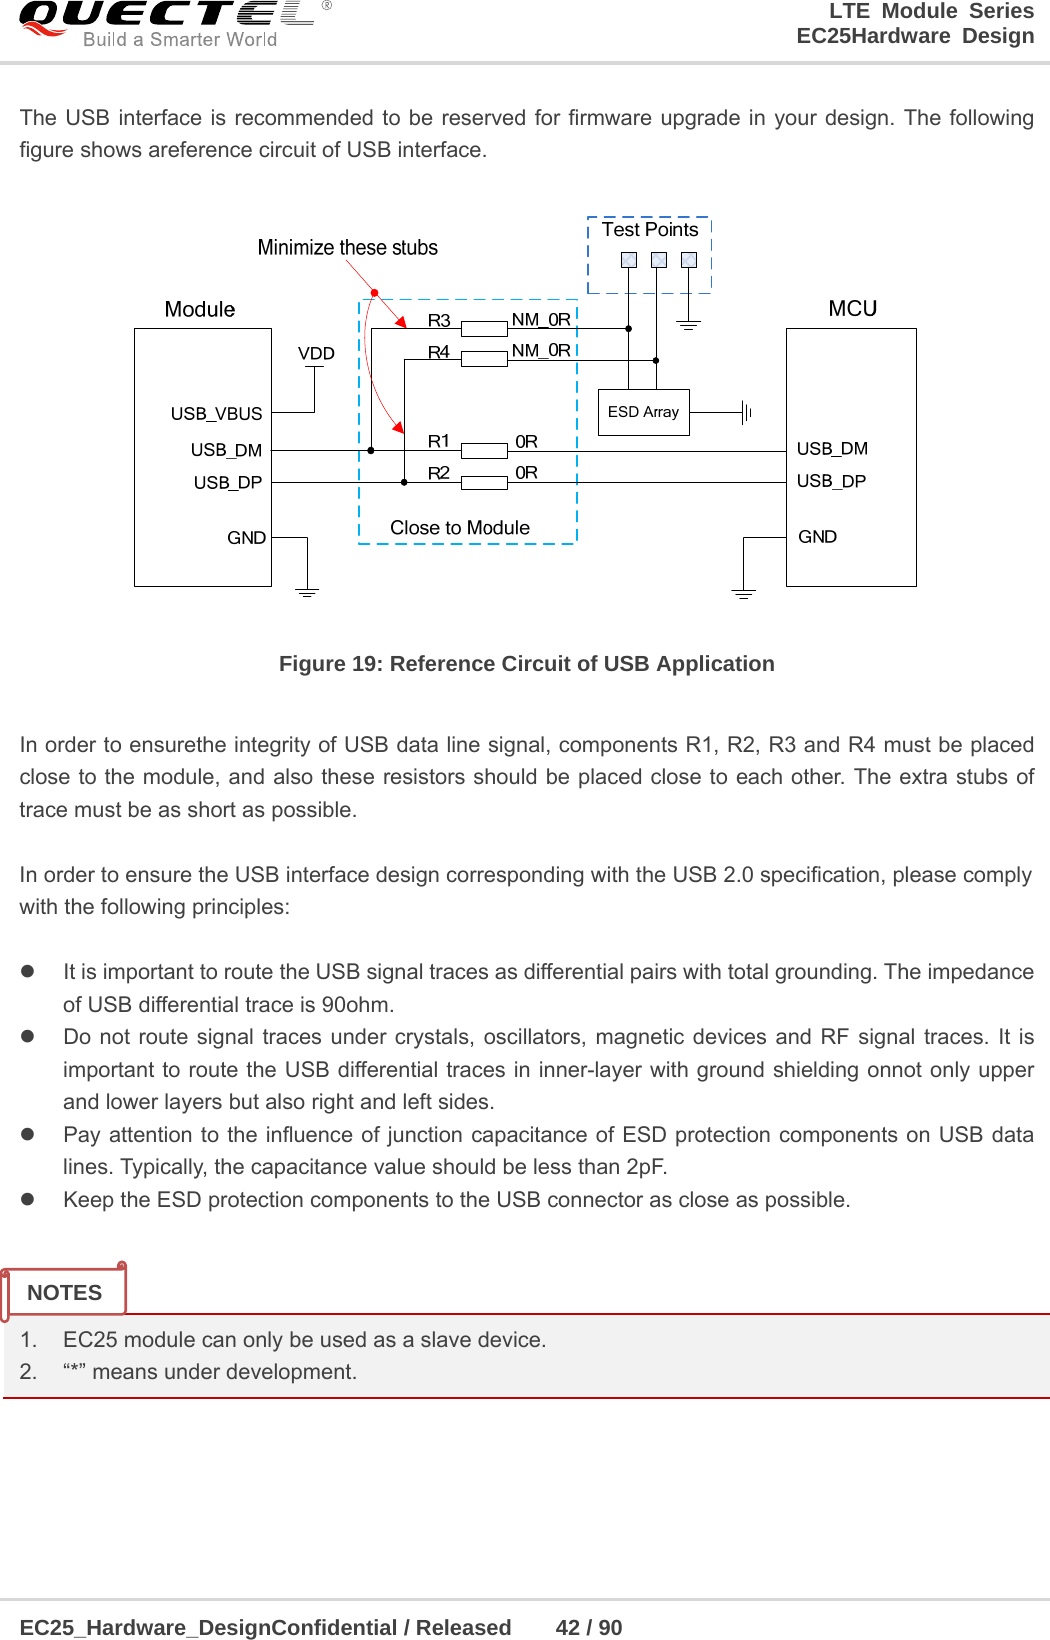 LTE Module Series                                                  EC25Hardware Design  EC25_Hardware_DesignConfidential / Released    42 / 90    The USB interface is recommended to be reserved for firmware upgrade in your design. The following figure shows areference circuit of USB interface.  Figure 19: Reference Circuit of USB Application  In order to ensurethe integrity of USB data line signal, components R1, R2, R3 and R4 must be placed close to the module, and also these resistors should be placed close to each other. The extra stubs of trace must be as short as possible.  In order to ensure the USB interface design corresponding with the USB 2.0 specification, please comply with the following principles:    It is important to route the USB signal traces as differential pairs with total grounding. The impedance of USB differential trace is 90ohm.   Do not route signal traces under crystals, oscillators, magnetic devices and RF signal traces. It is important to route the USB differential traces in inner-layer with ground shielding onnot only upper and lower layers but also right and left sides.   Pay attention to the influence of junction capacitance of ESD protection components on USB data lines. Typically, the capacitance value should be less than 2pF.   Keep the ESD protection components to the USB connector as close as possible.   1.  EC25 module can only be used as a slave device. 2.  “*” means under development.   NOTES 